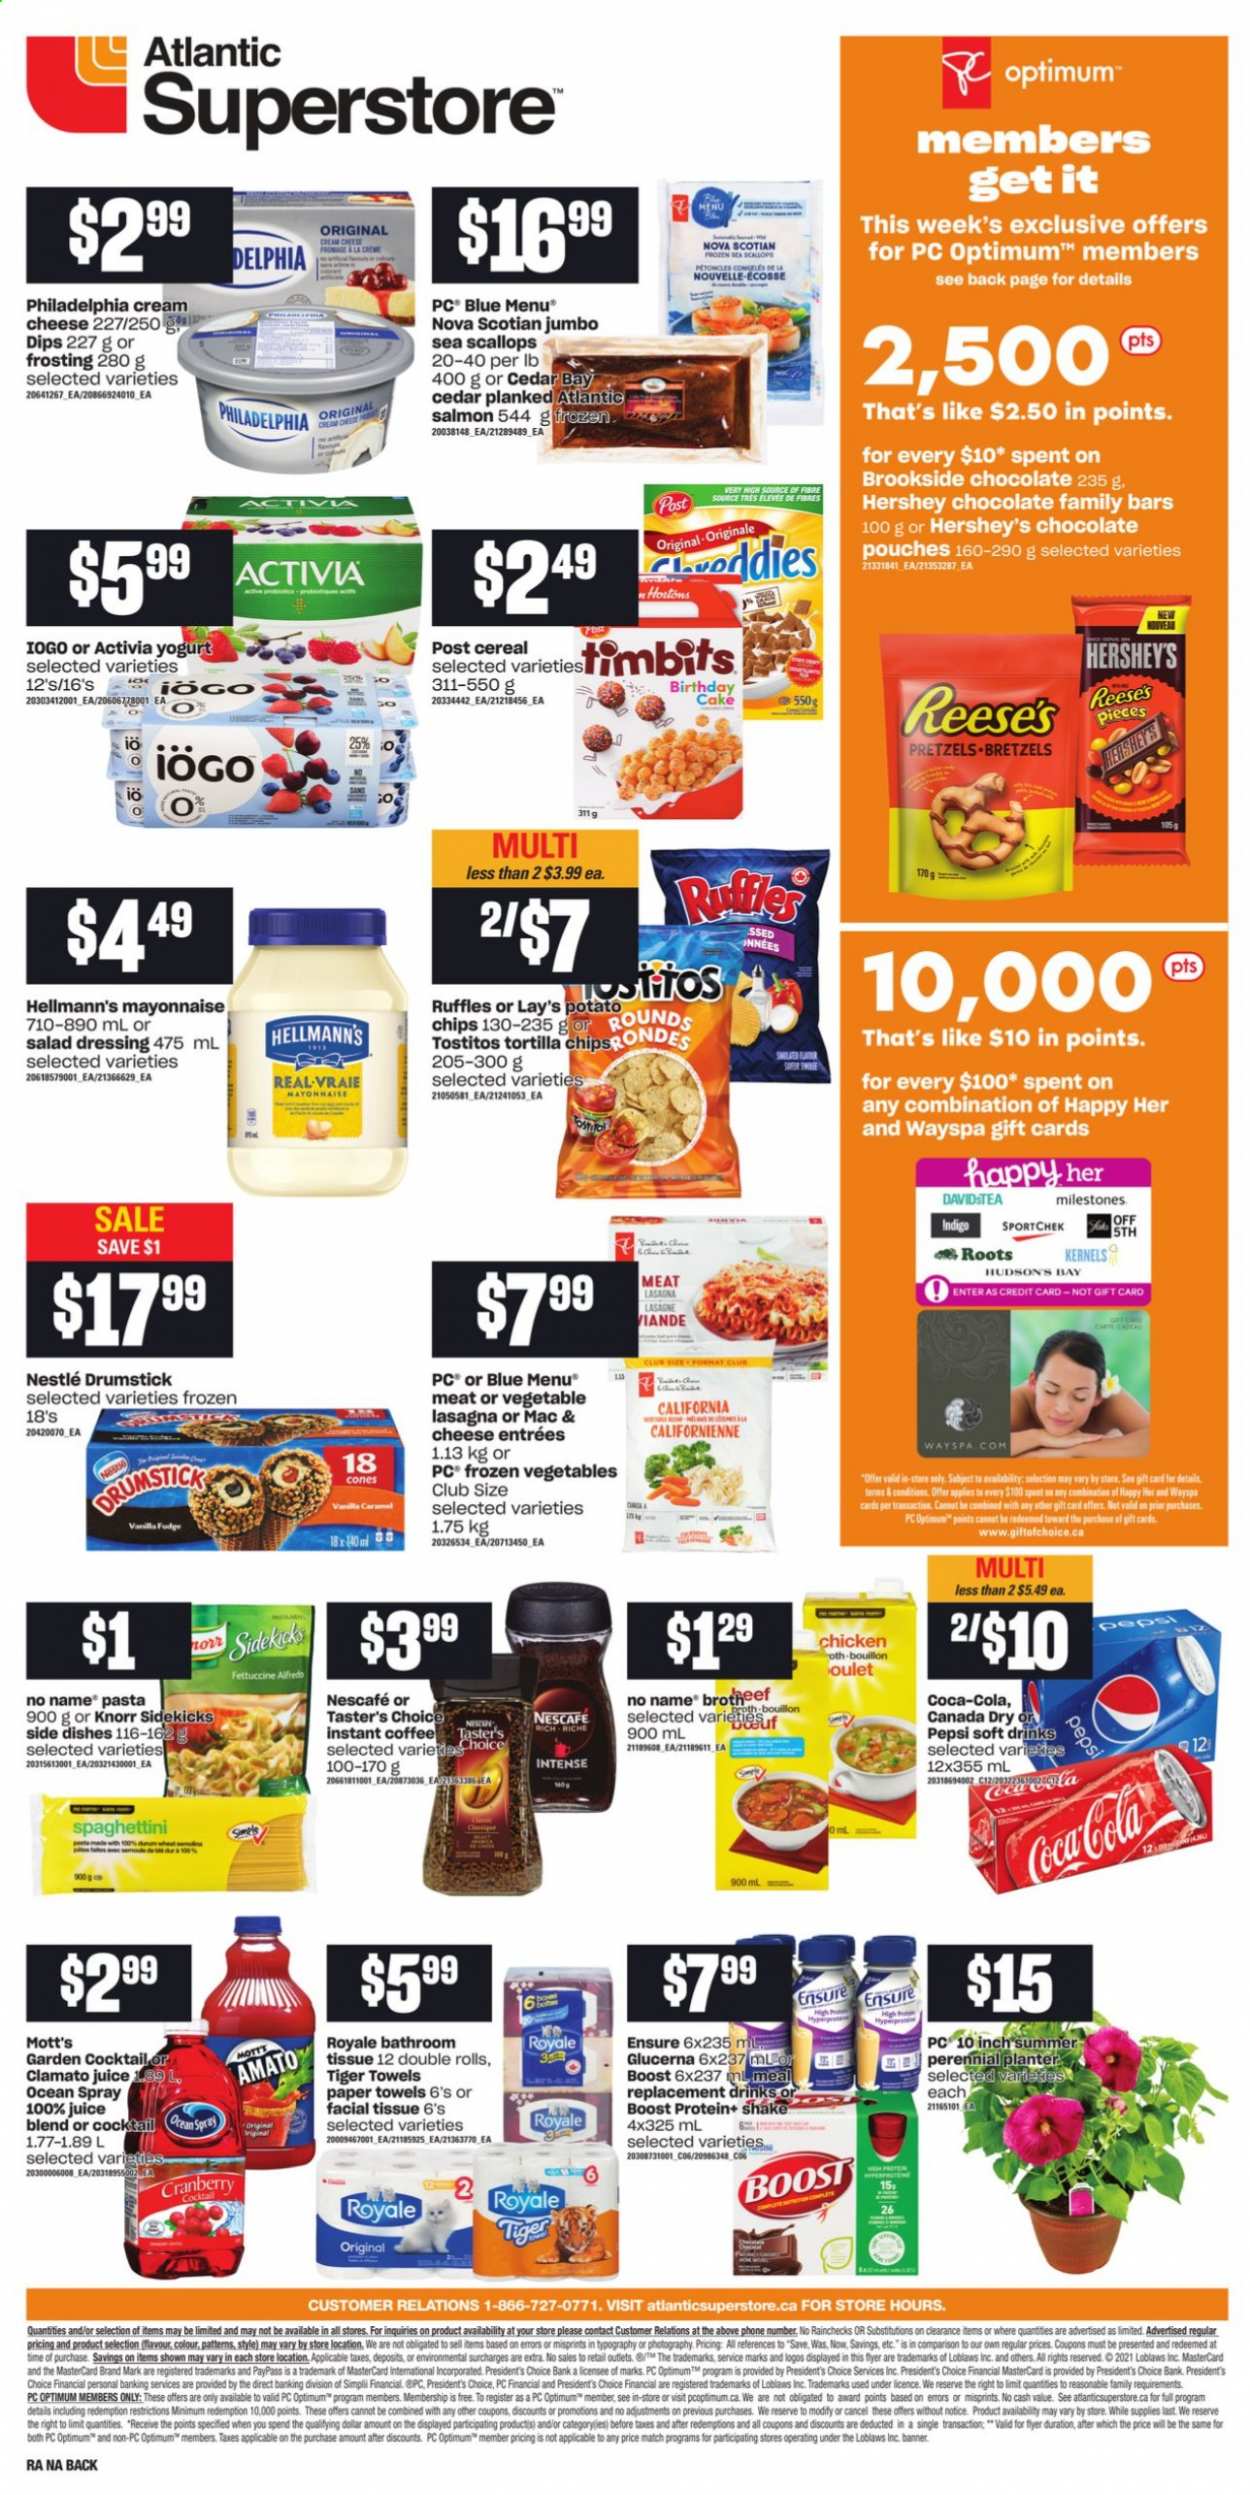 thumbnail - Atlantic Superstore Flyer - July 29, 2021 - August 04, 2021 - Sales products - tortillas, pretzels, cake, Mott's, salmon, scallops, No Name, pasta, lasagna meal, cream cheese, Président, yoghurt, Activia, shake, mayonnaise, Hellmann’s, Reese's, Hershey's, frozen vegetables, fudge, chocolate, potato chips, Lay’s, Ruffles, Tostitos, bouillon, frosting, cereals, salad dressing, dressing, Canada Dry, Coca-Cola, Pepsi, juice, Clamato, soft drink, Boost, instant coffee, bath tissue, kitchen towels, paper towels, Optimum, Glucerna, Knorr, Nestlé, Nescafé. Page 2.